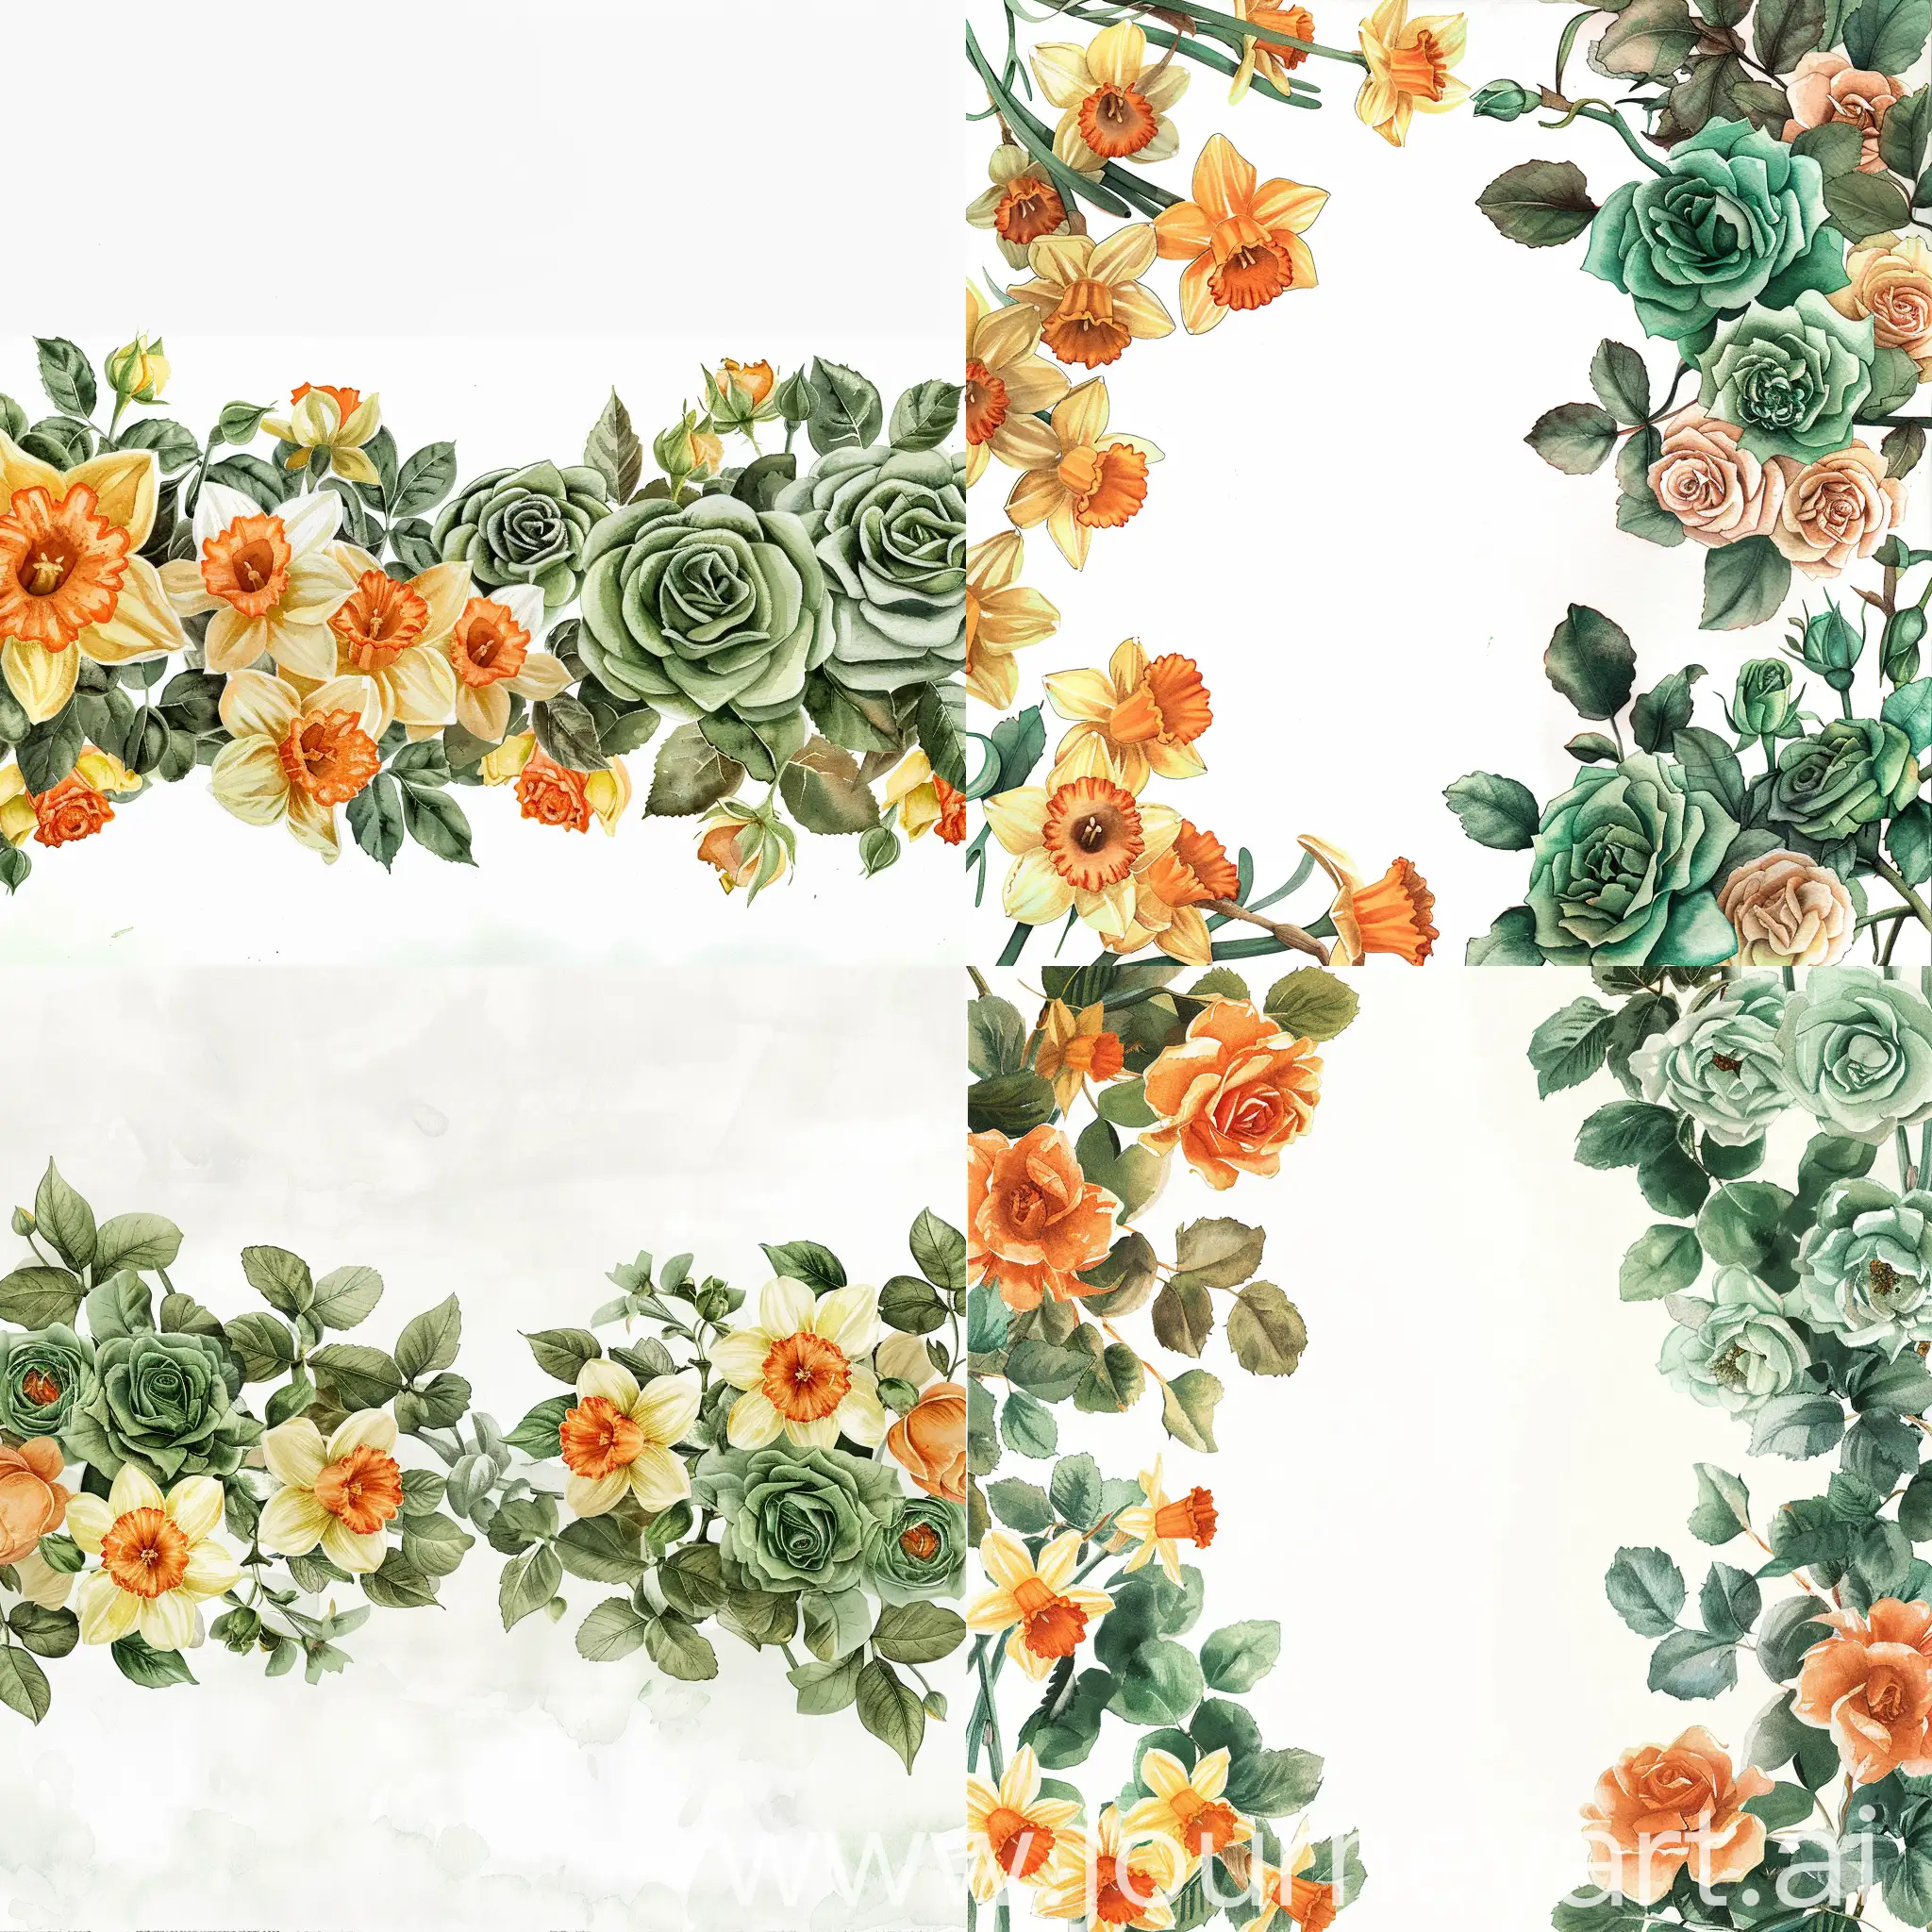 Spring-Floral-Watercolor-Painting-Orange-Daffodils-and-Green-Roses-on-White-Background